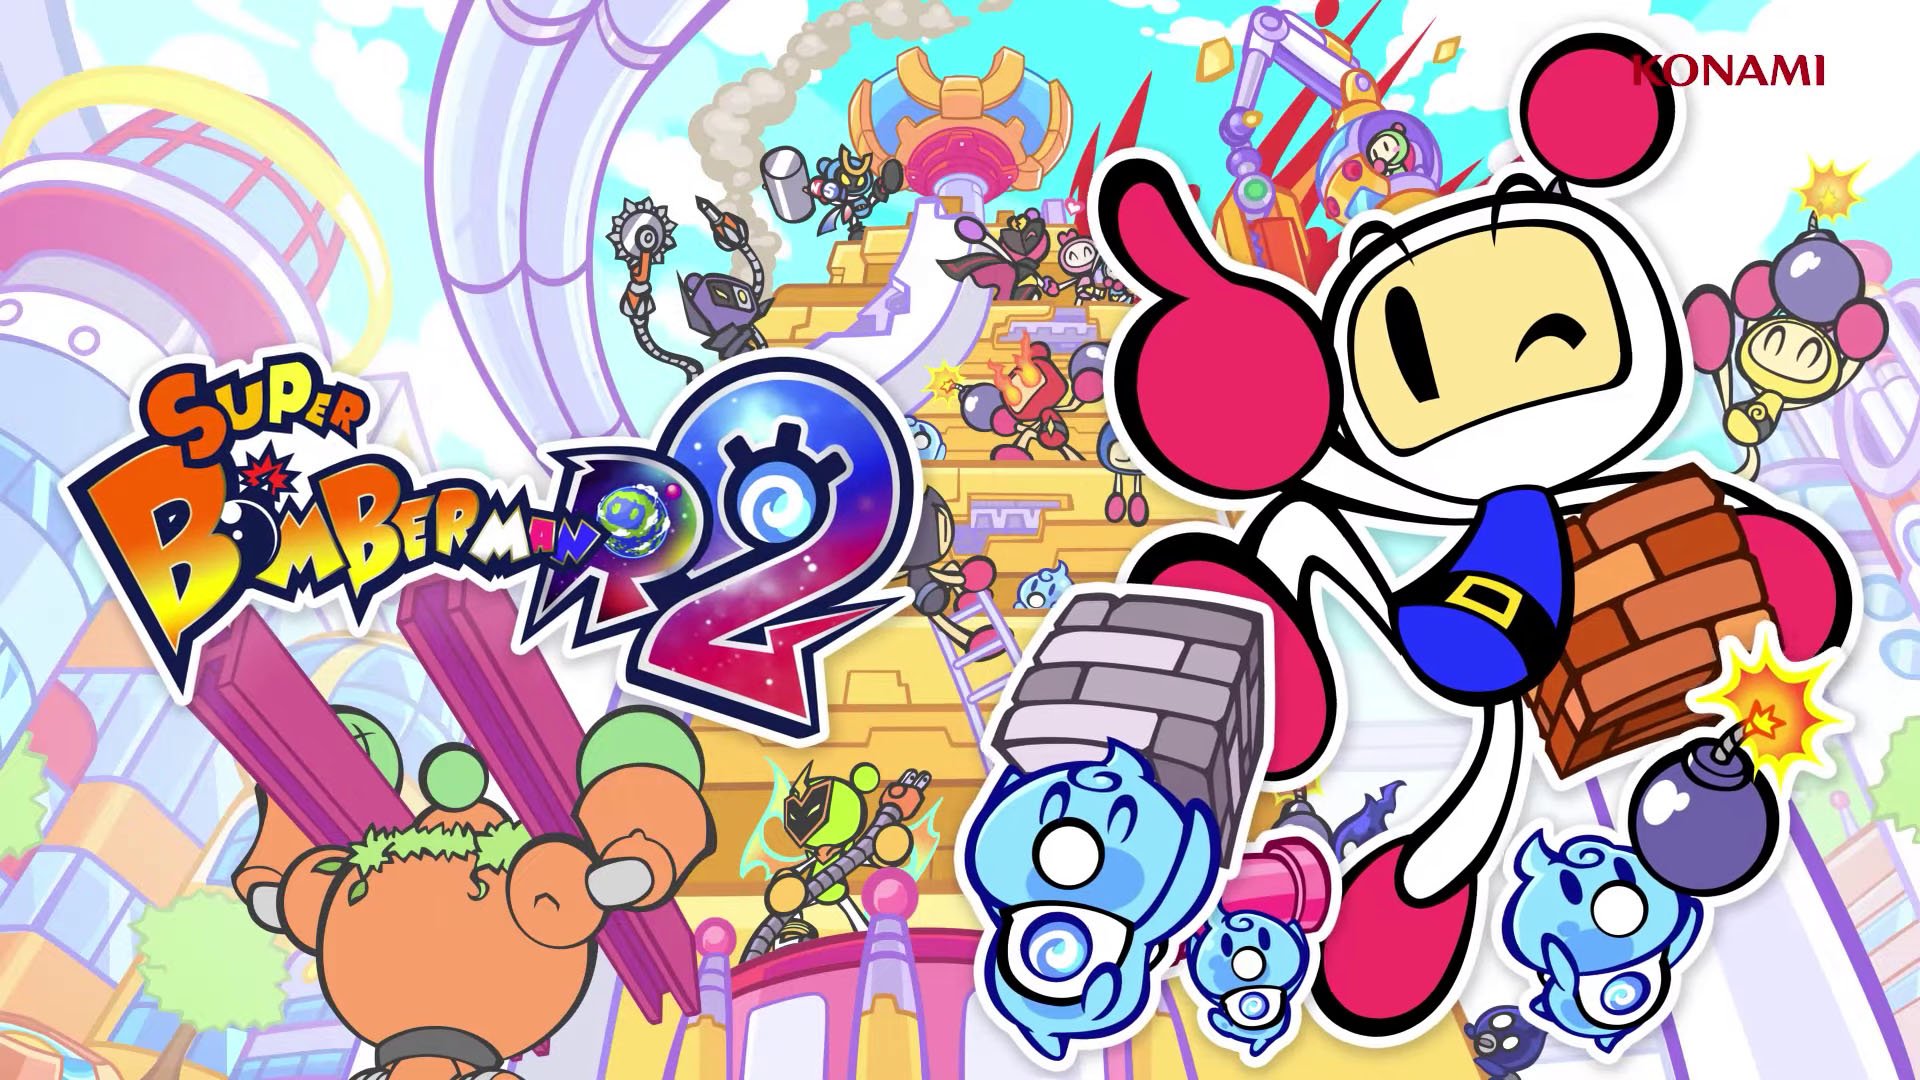 Super Bomberman R Online servers will be switched off in December